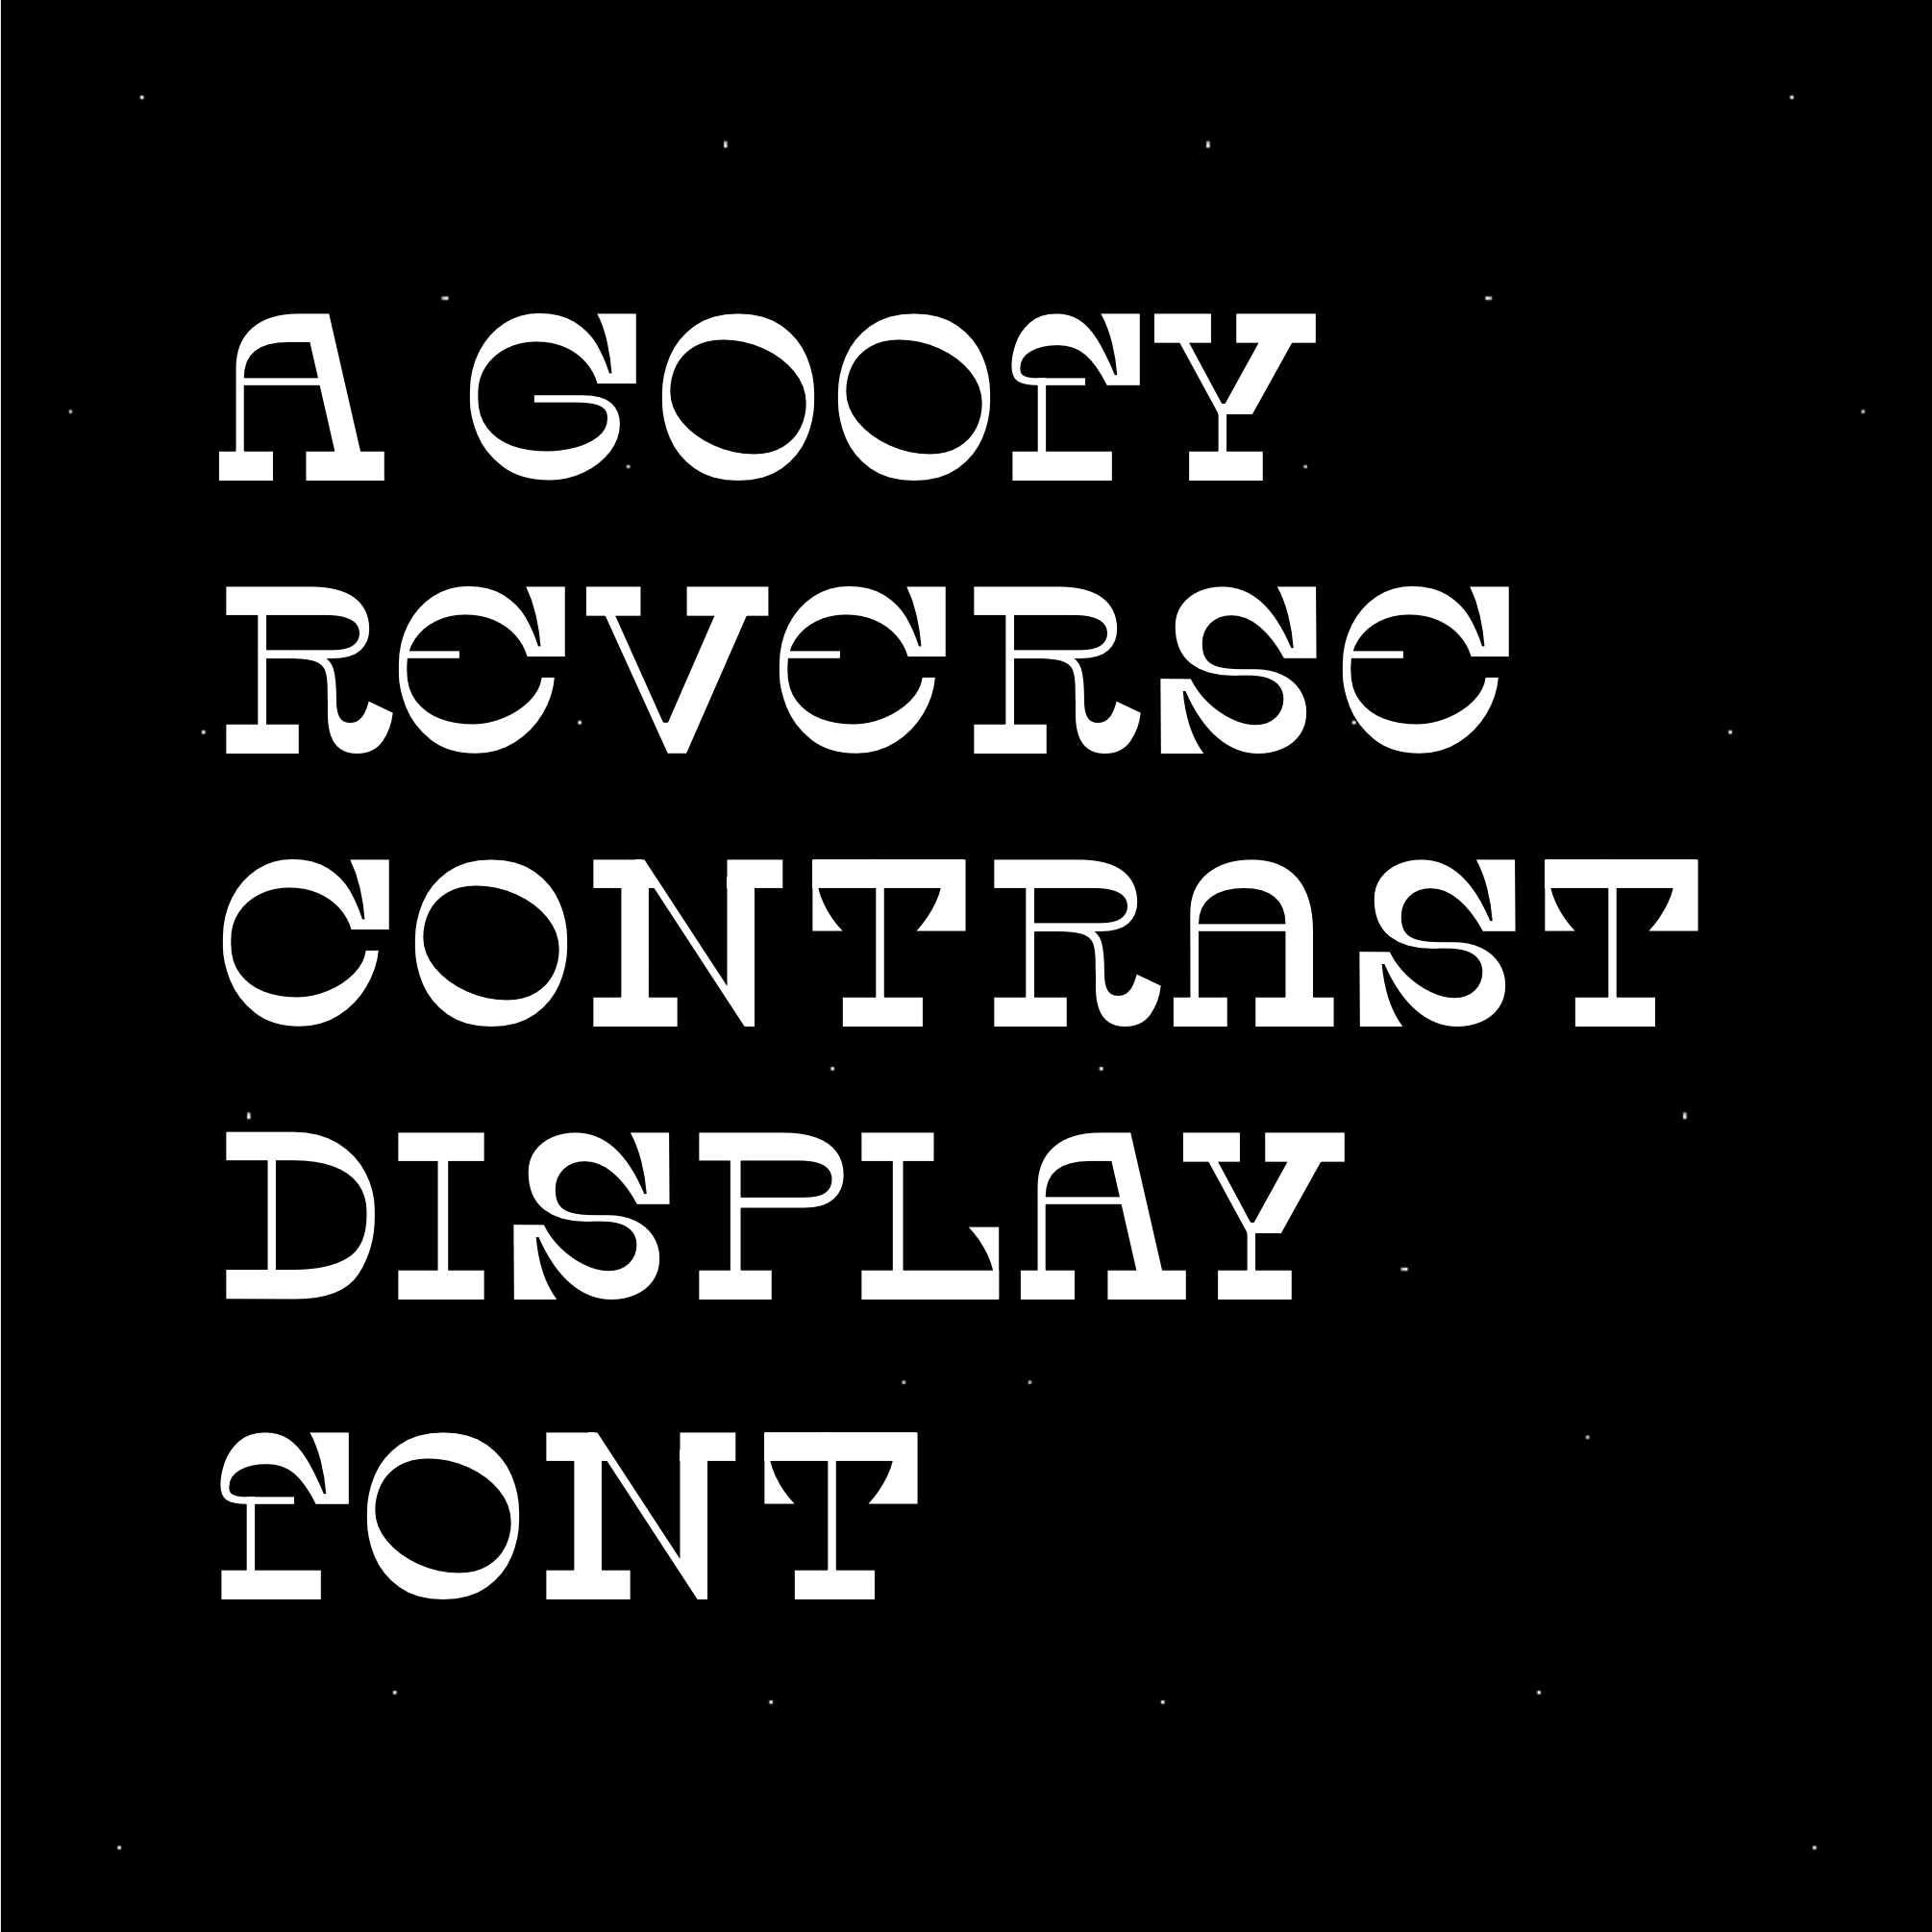 The text (A goofy reverse contrast display font) typeset in the font Space Cowgirl